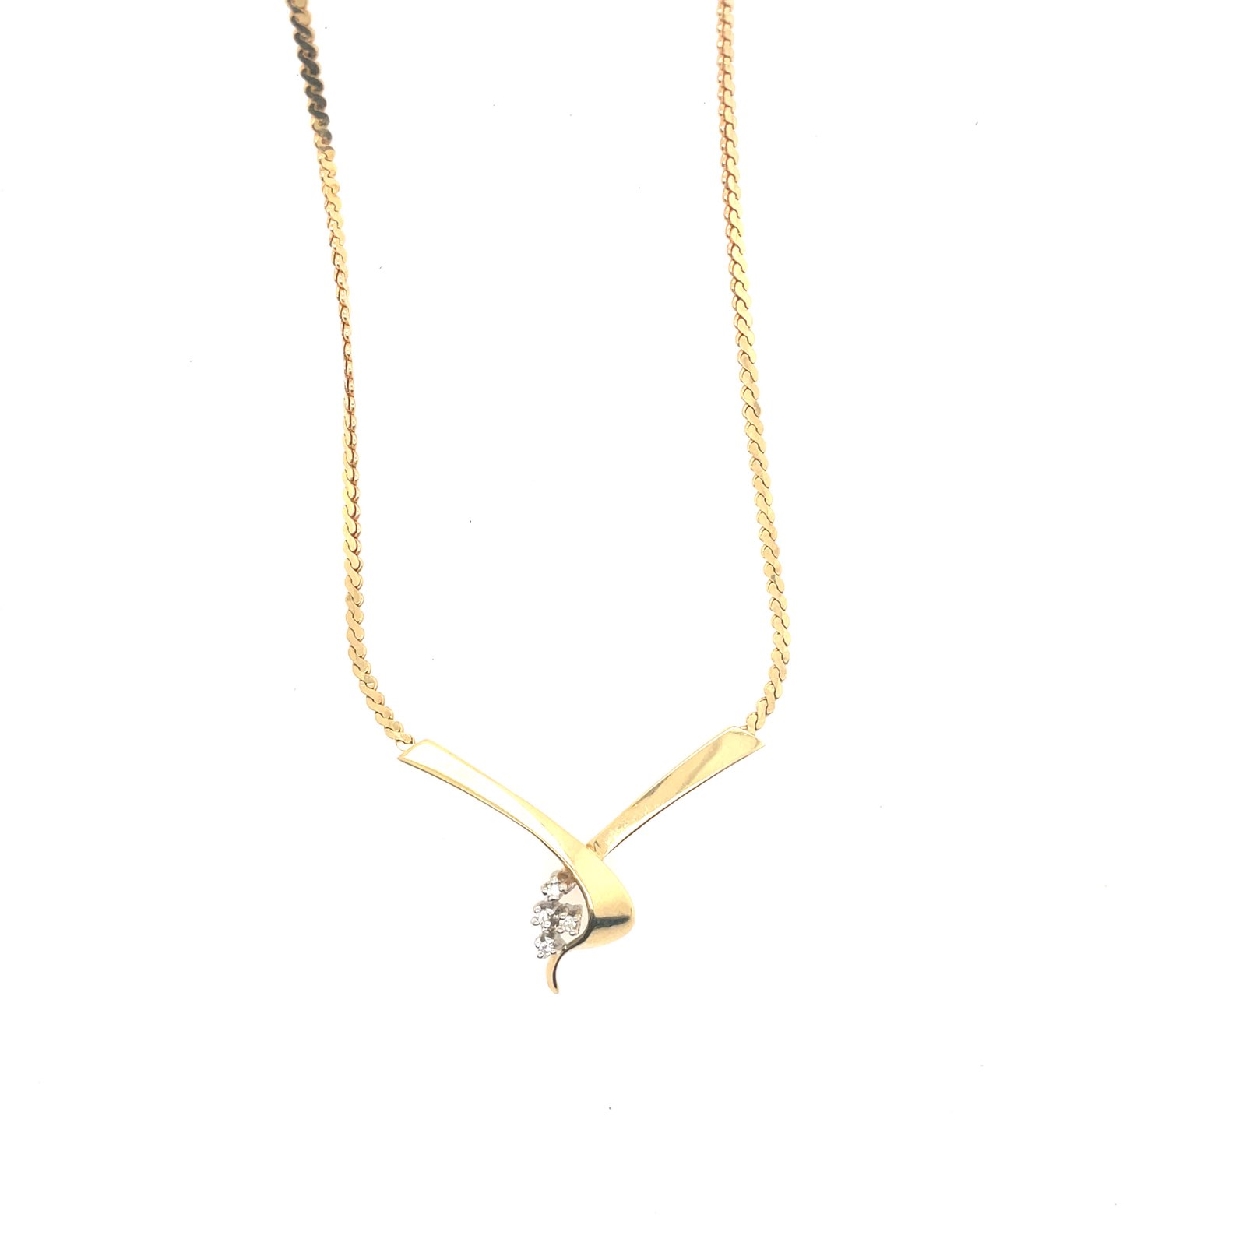 14k Yellow Gold Serpentine Chain Necklace with Stationary Pendant Set with Diamonds

17 Inches